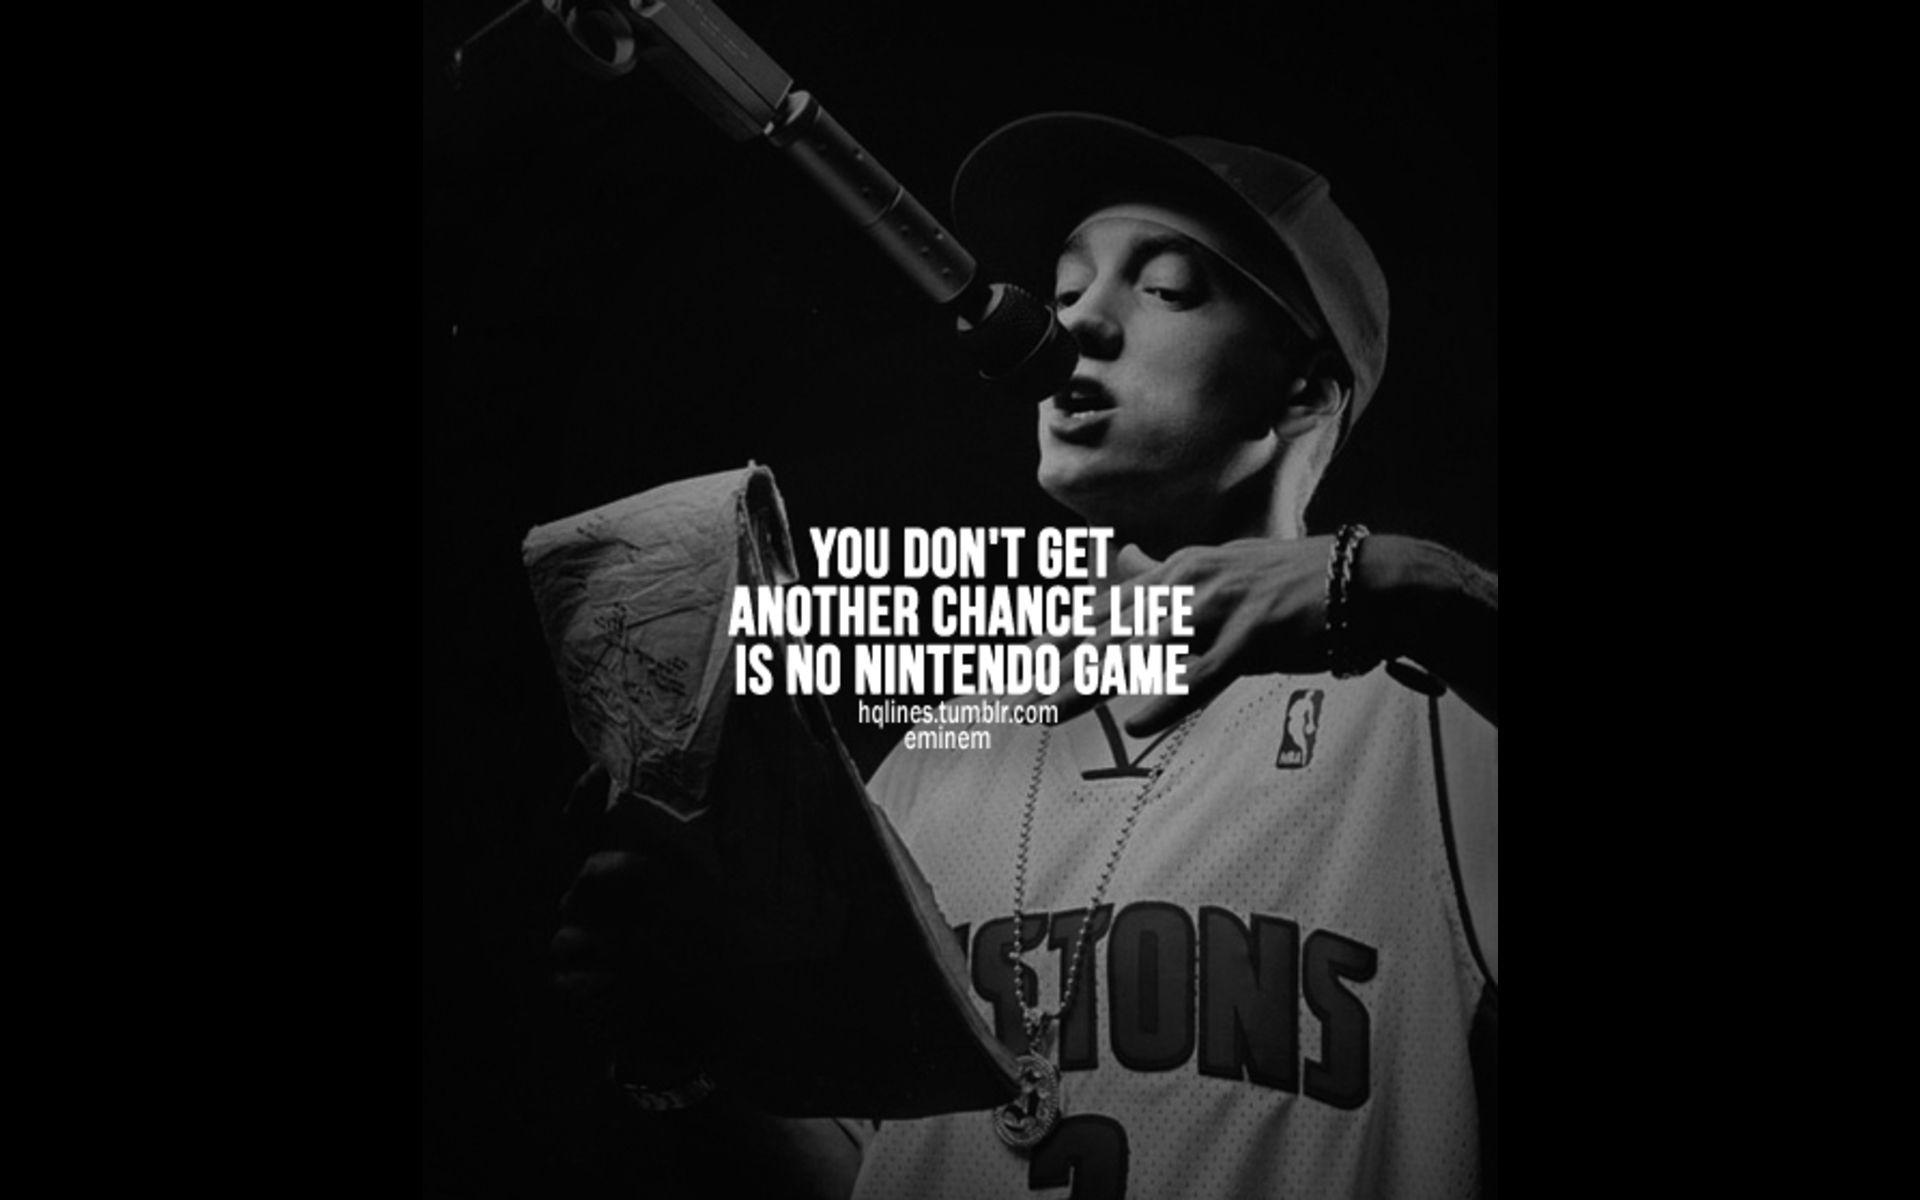 eminem quotes about haters